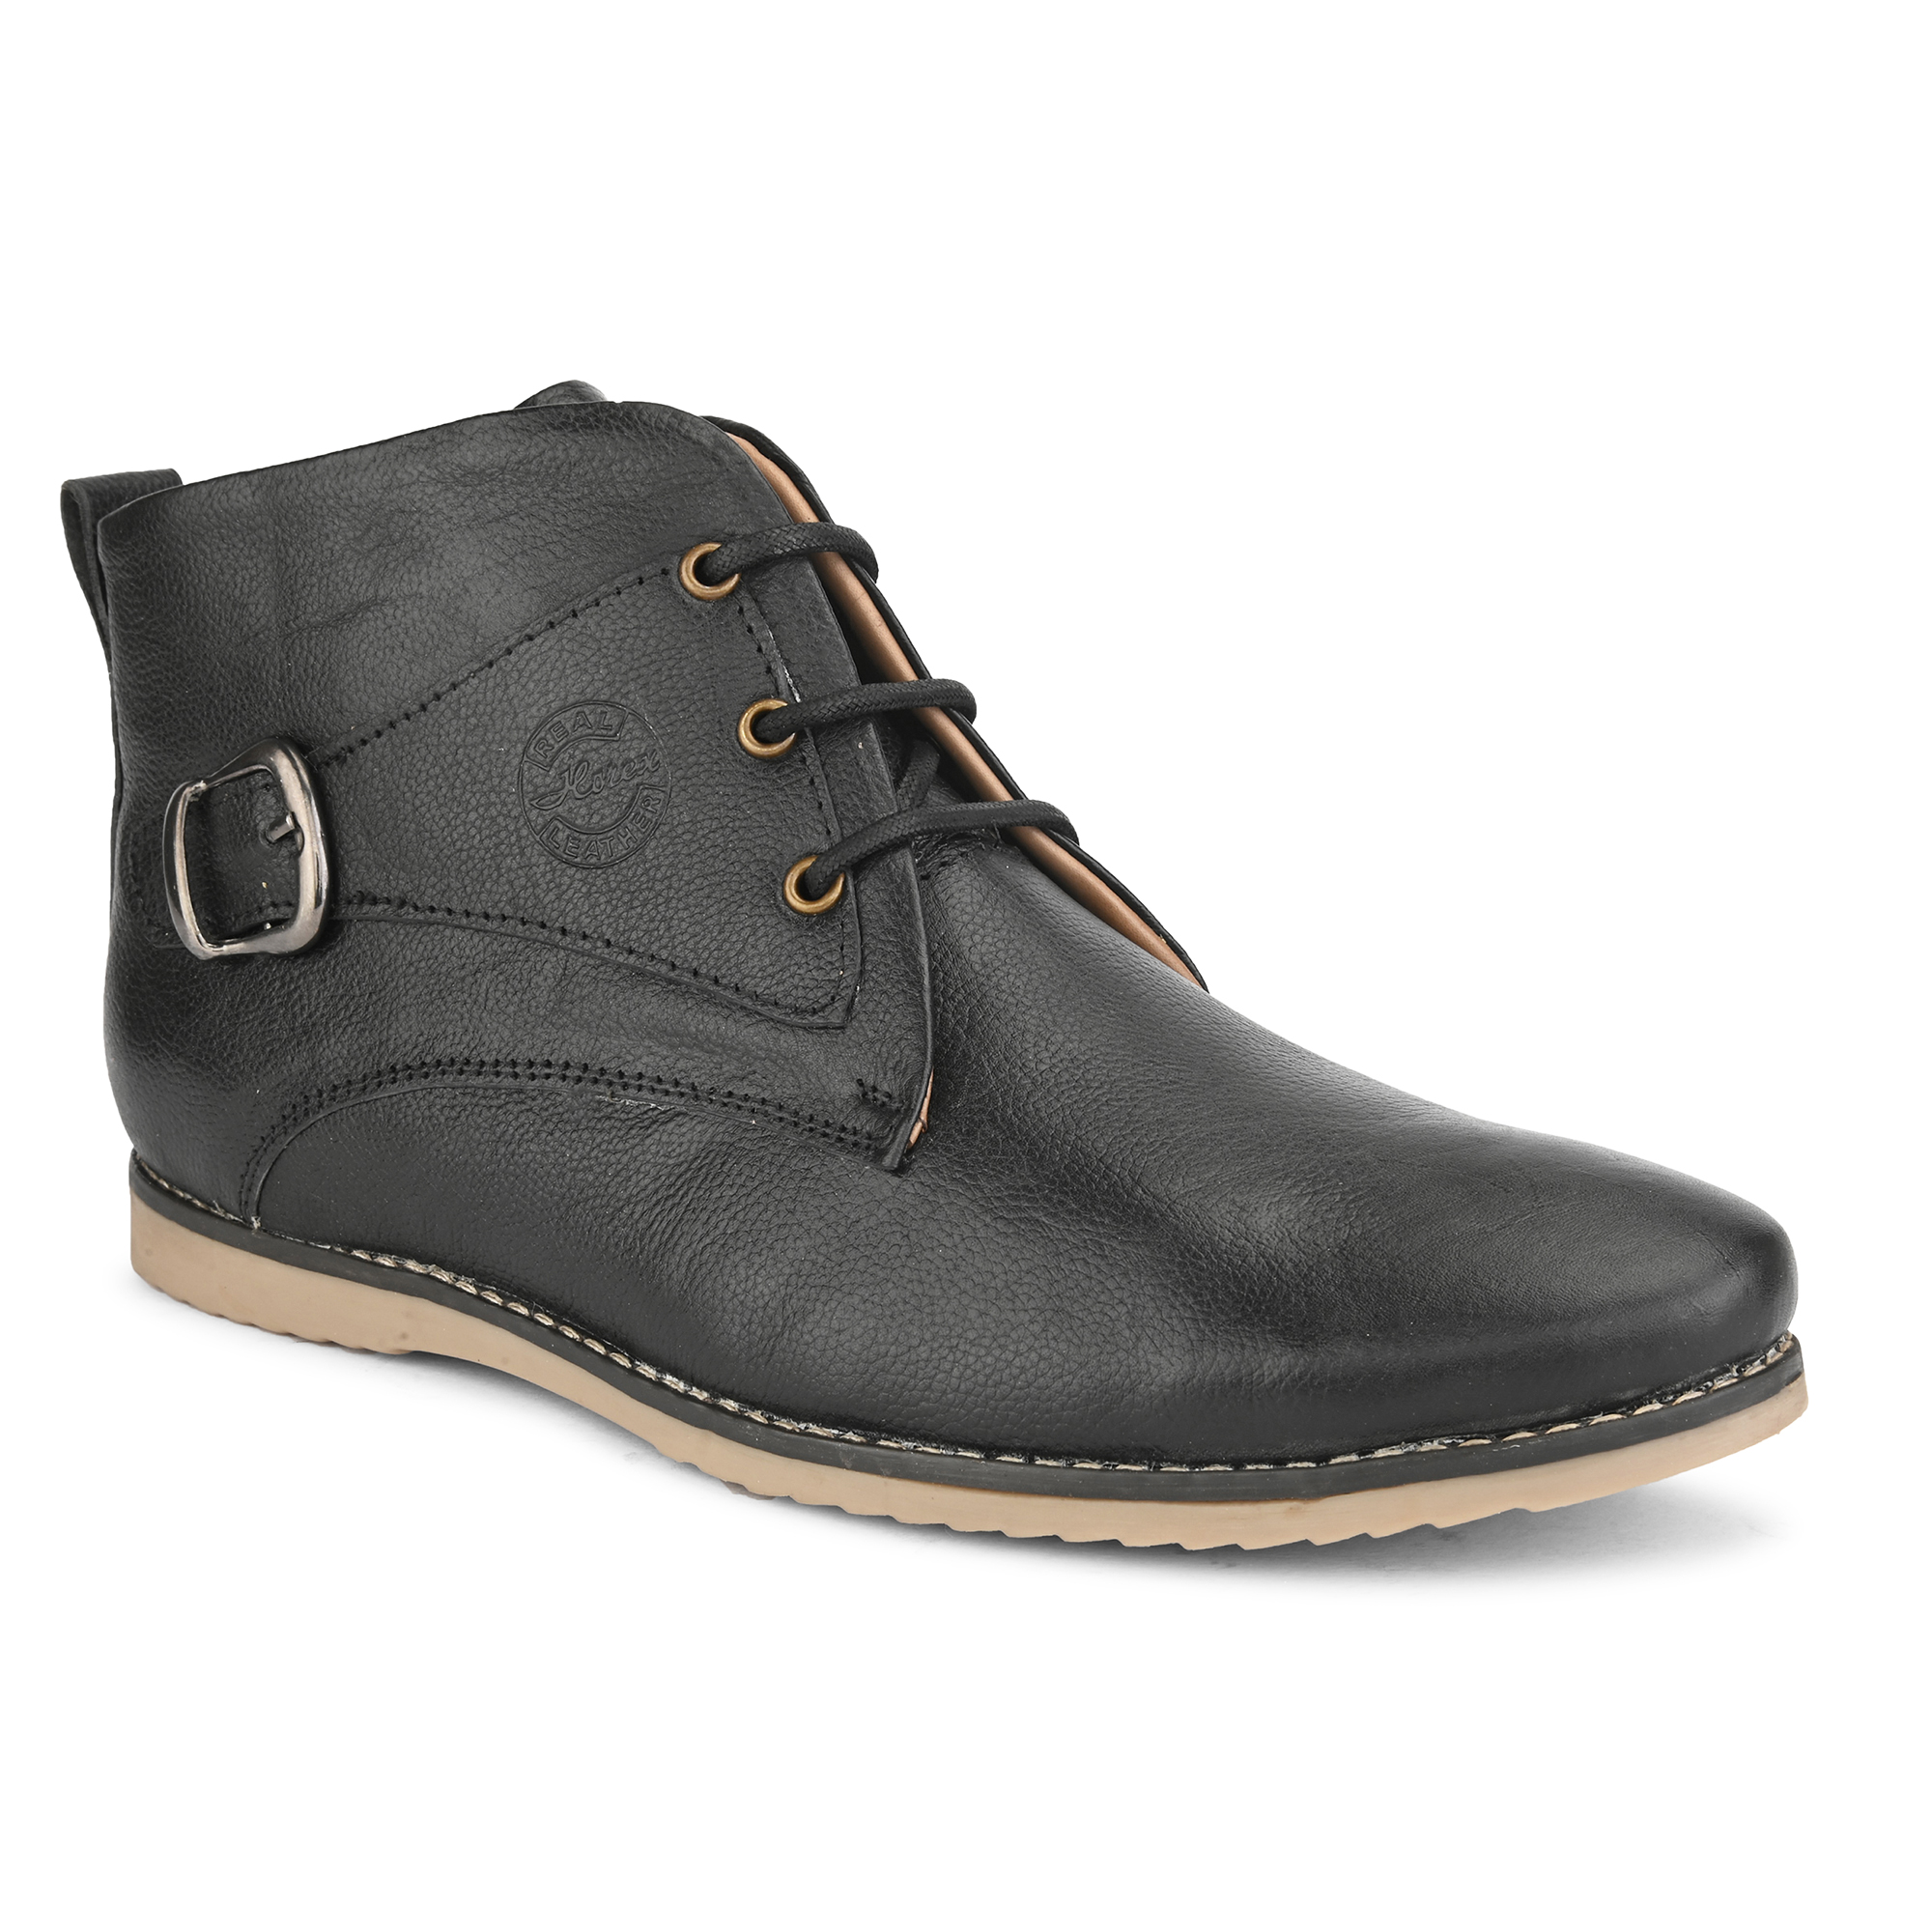 Black Chukka Boots For Men, Made in Genuine Leather | Horex®